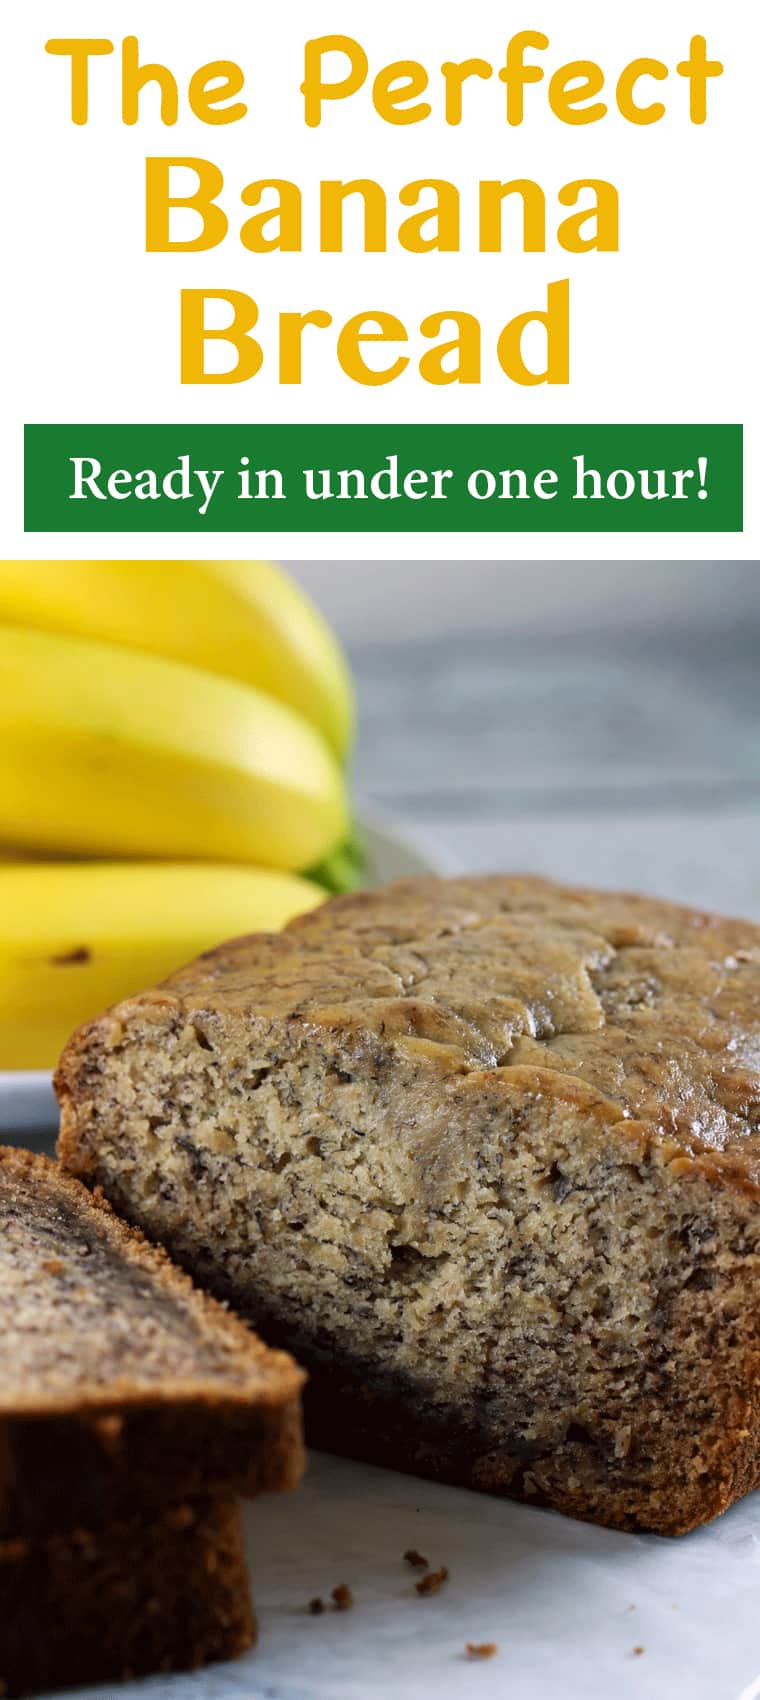 The Perfect Banana Bread - Banana bread is such a classic and delicious dessert! And we have the PERFECT recipe for you! This recipe will give you yummy, mouth-watering banana bread in under one hour! | ScrambledChefs.com